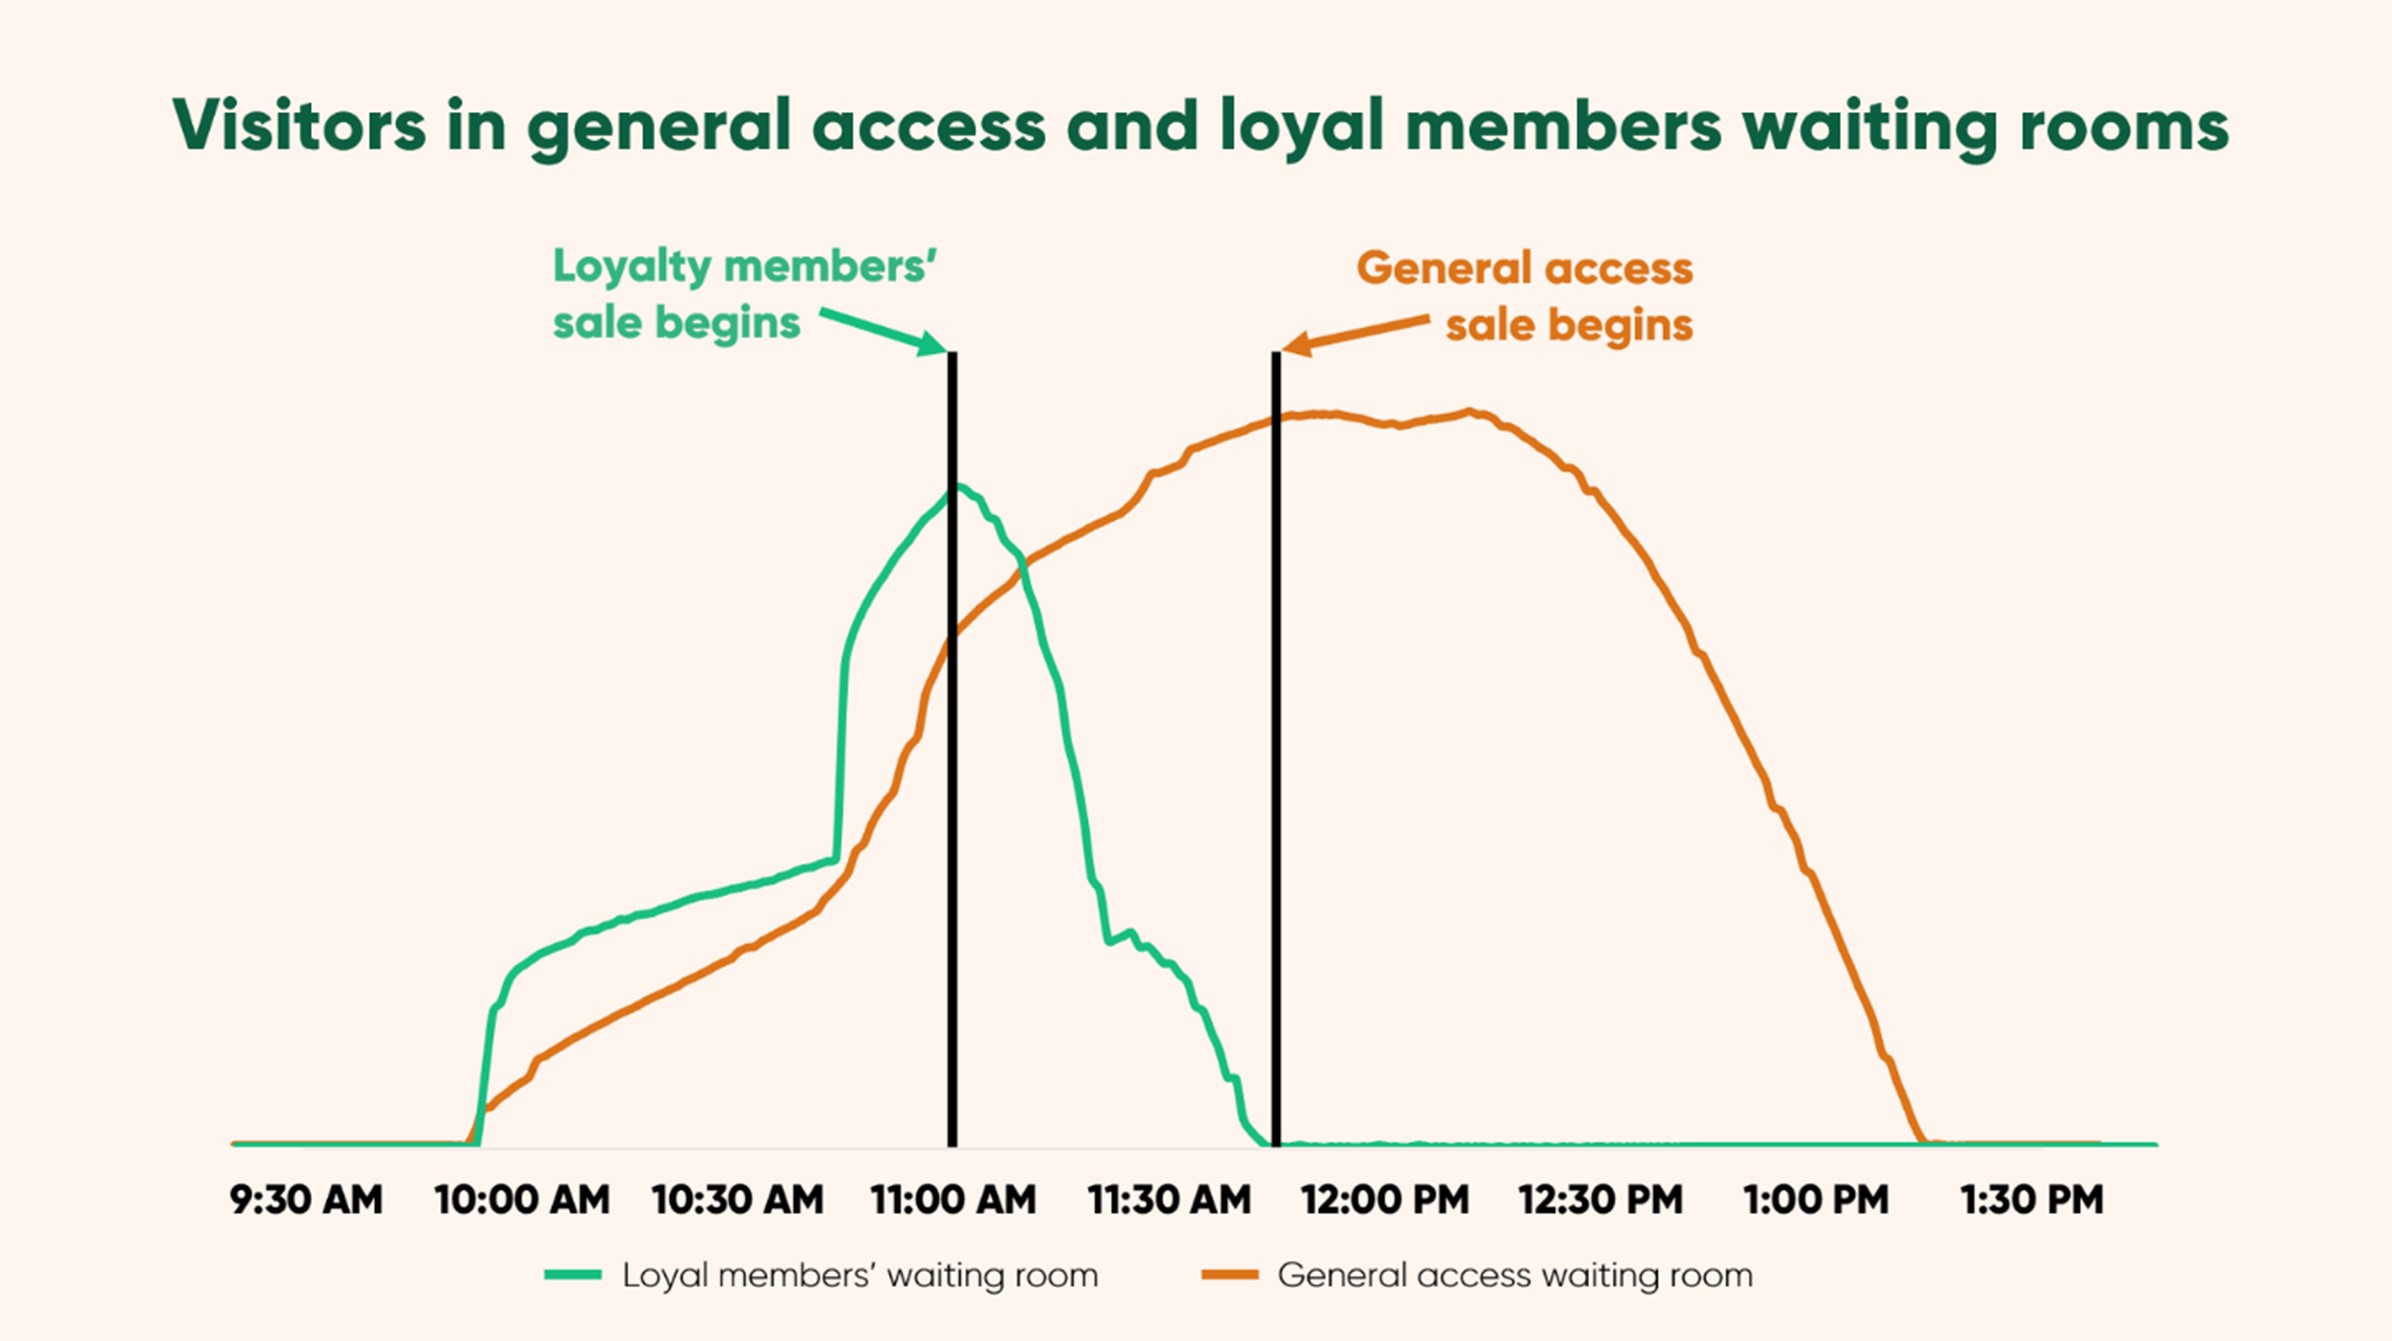 Graph showing Rapha's loyal members' and general access waiting rooms